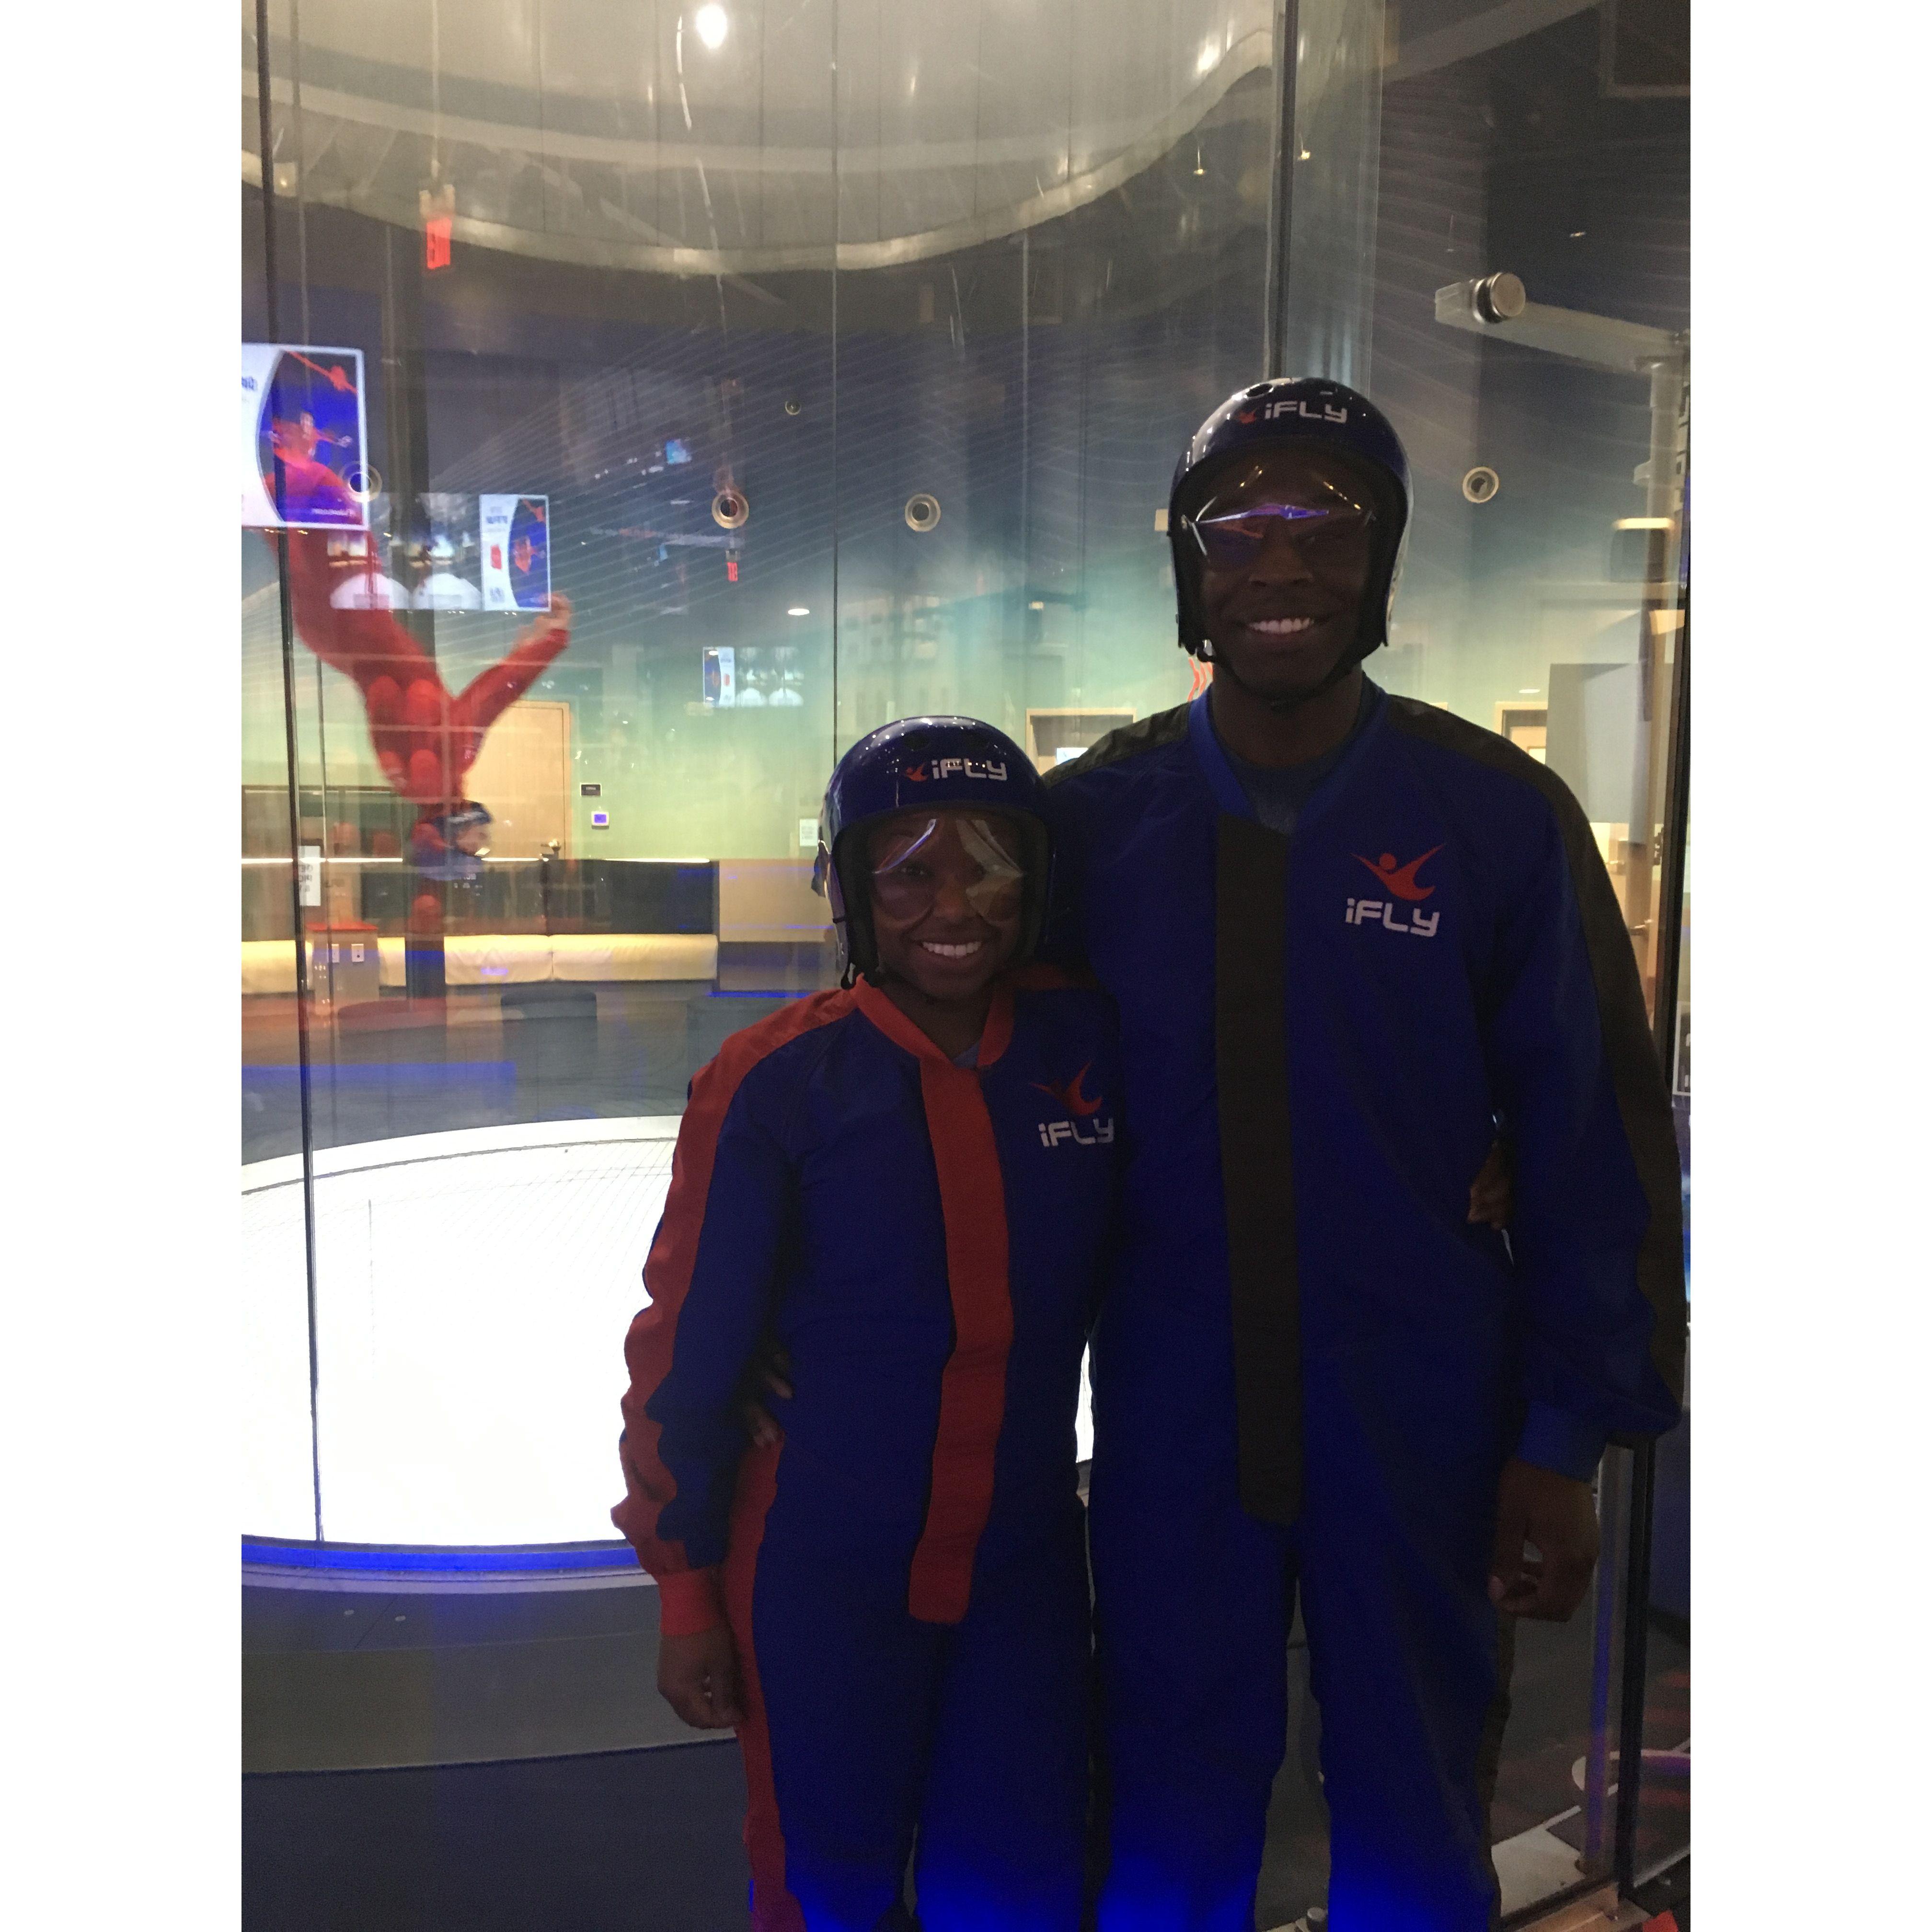 IFly birthday outing. 01/27/2017